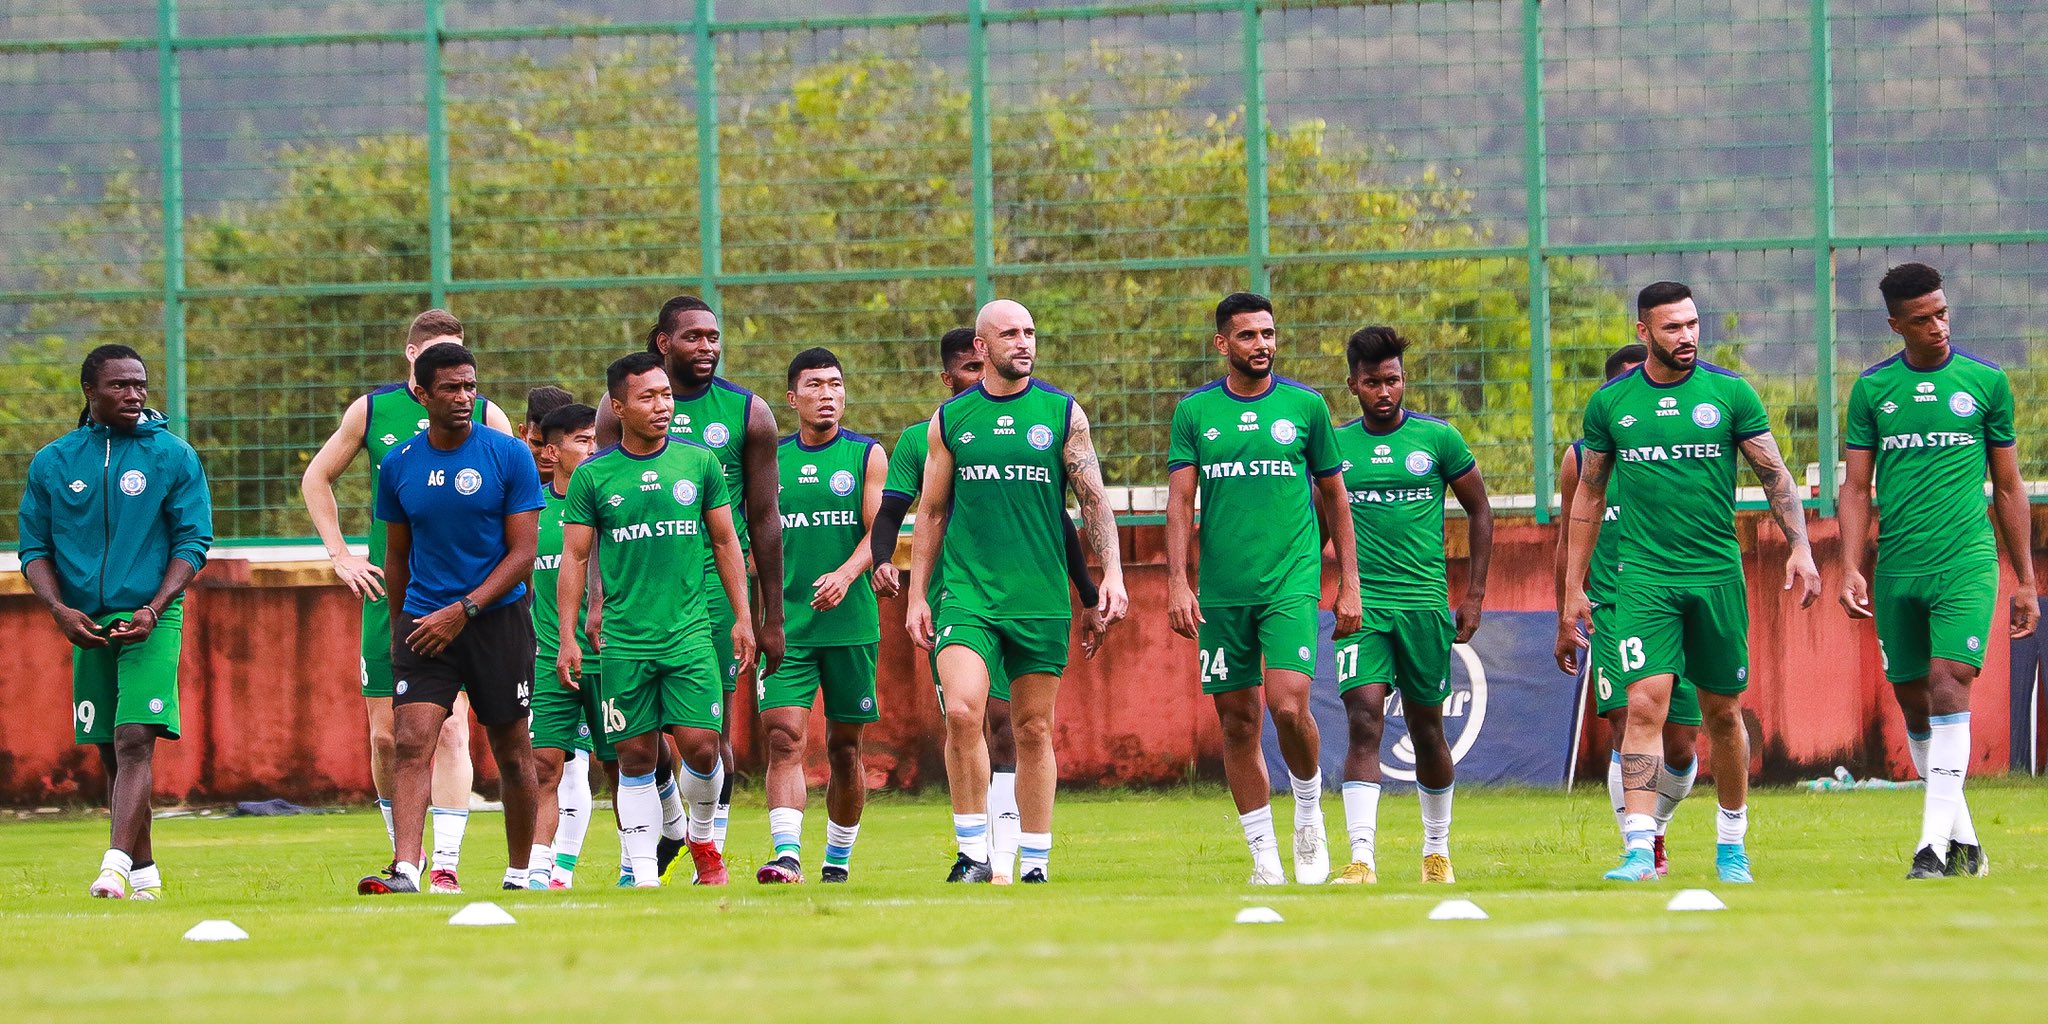 ISL 2022-23: Jamshedpur FC set to DEFEND shield title under new coach Aidy Boothroyd- Check Jamshedpur FC Preview, Team news, Predicted XI